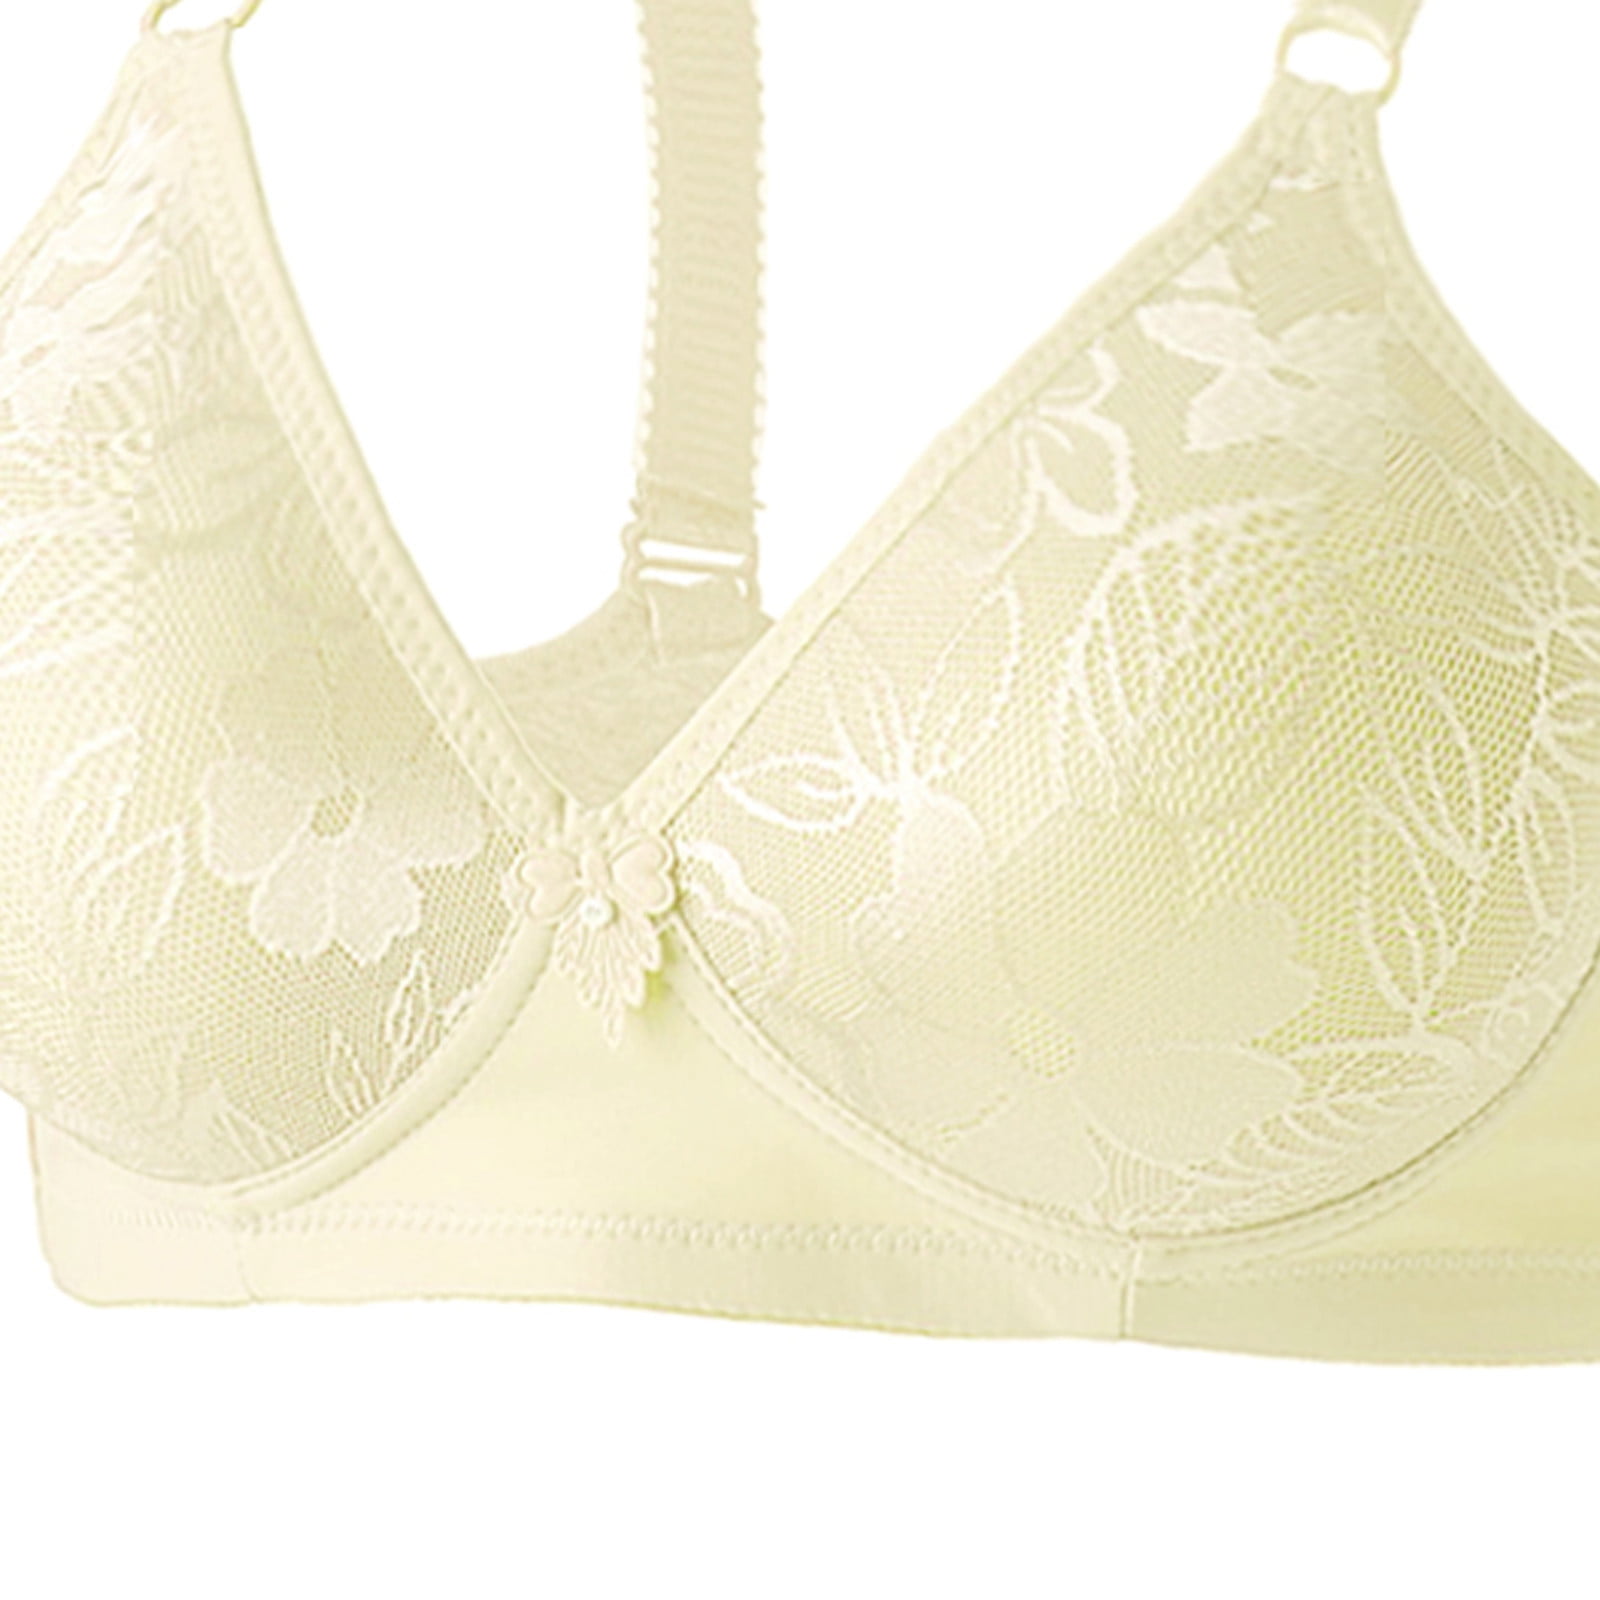 RYRJJ Wireless Push Up Bra for Women Floral Lace Soft Full Cup Seamless  Everyday Bras Adjustable Comfortable Wire Free Bralette(Beige,M) 